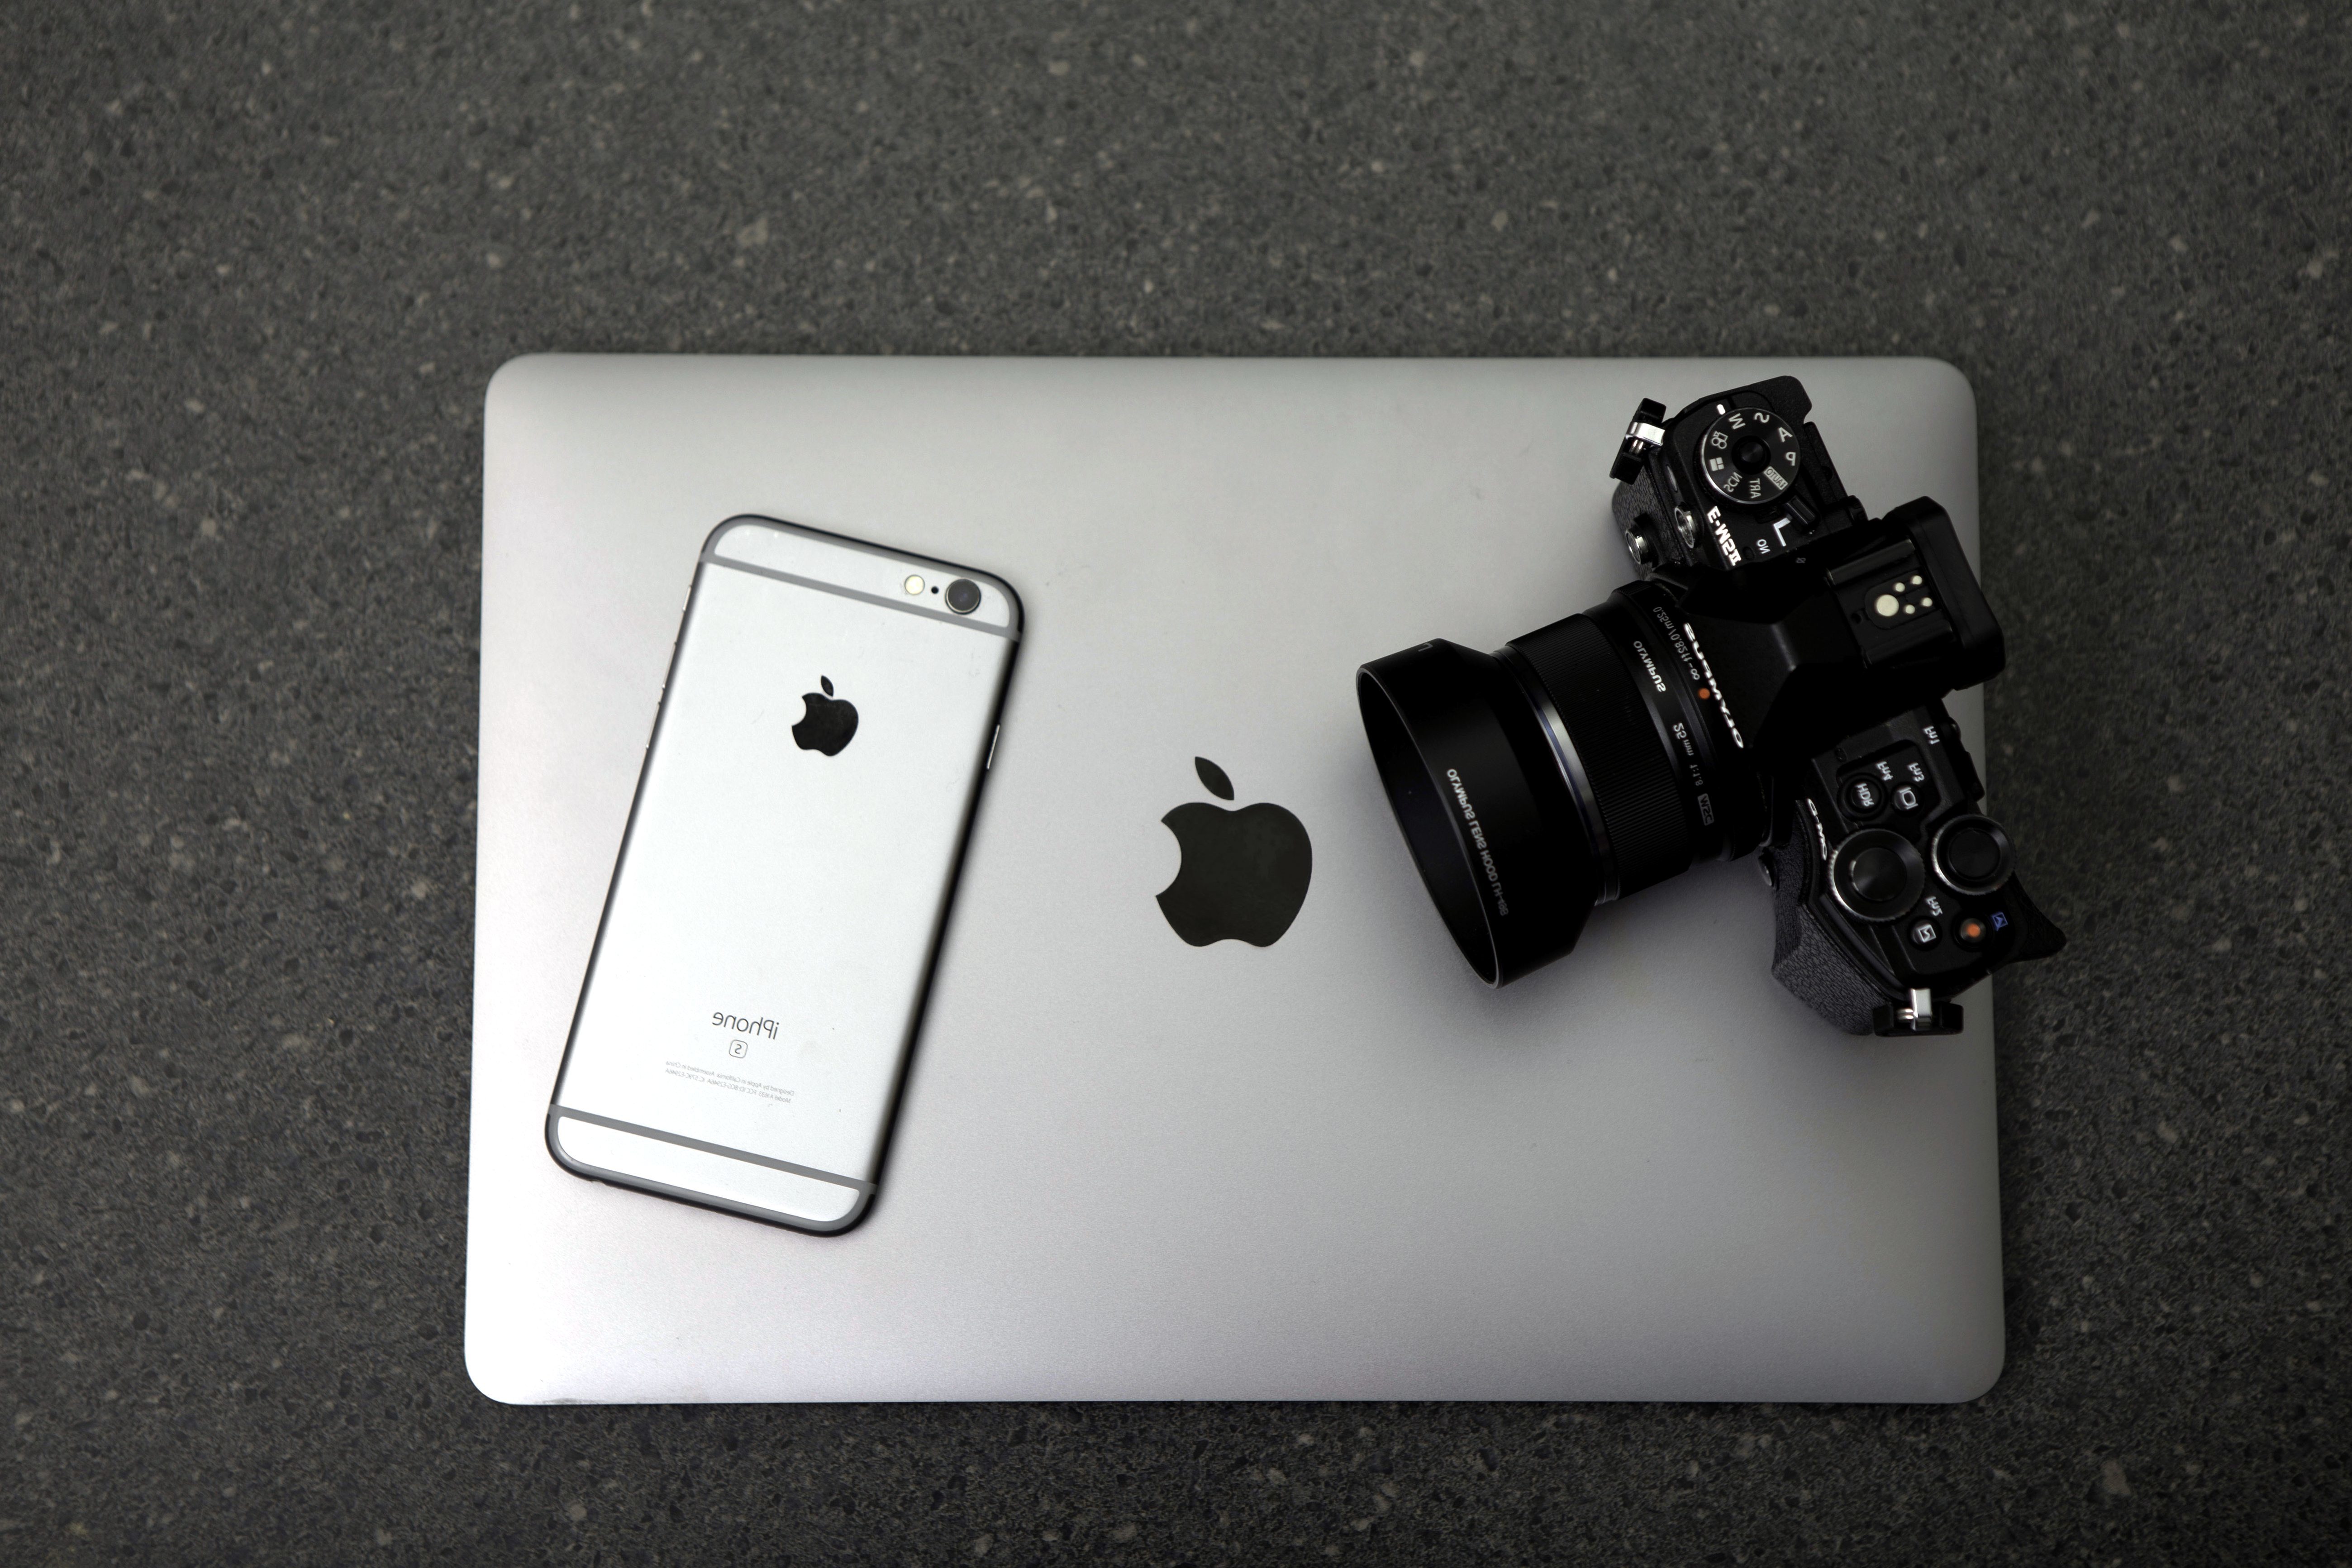 mac compatible image capture for iphone and digital cameras